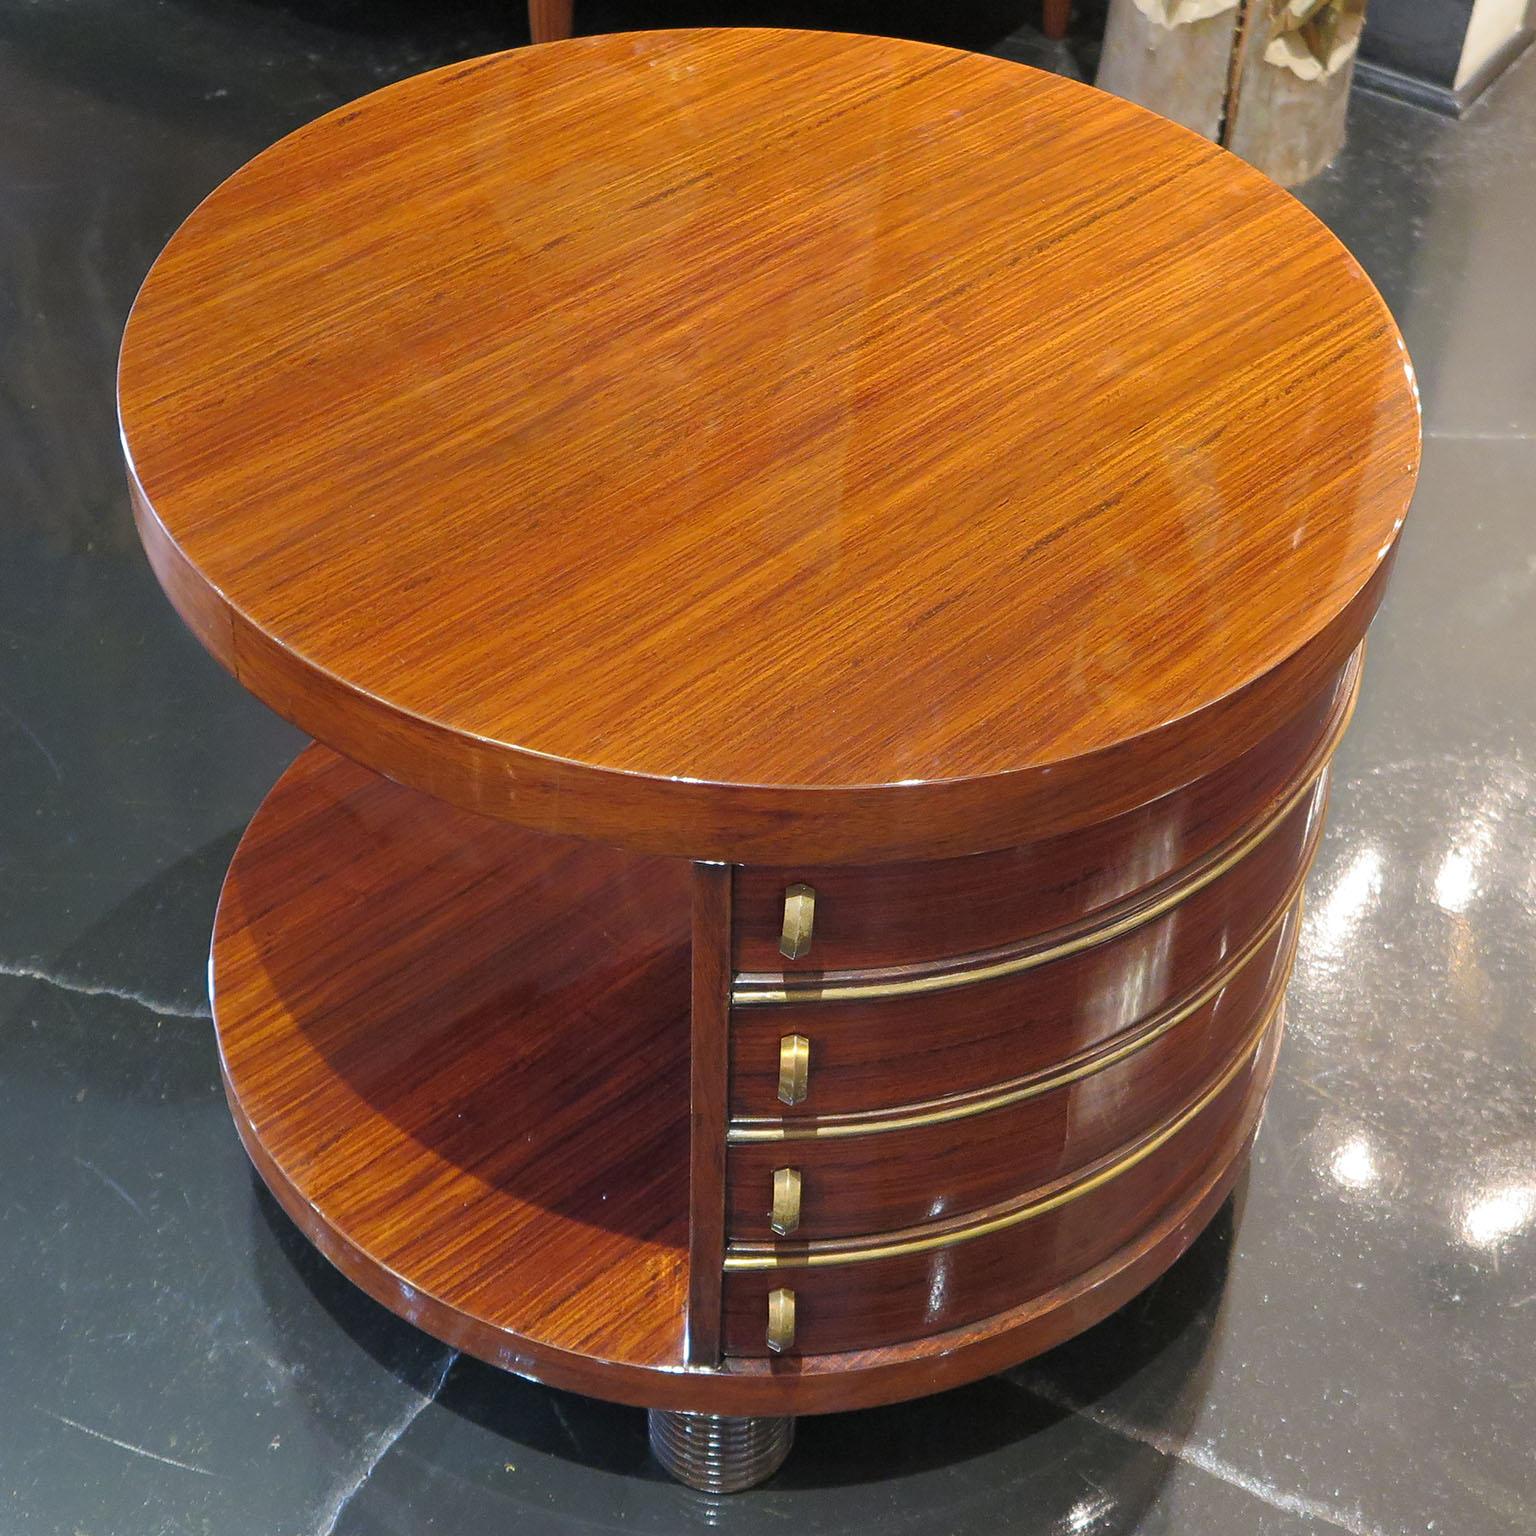 20th Century Art Deco Rosewood Side Table with Drawers, circa 1930s